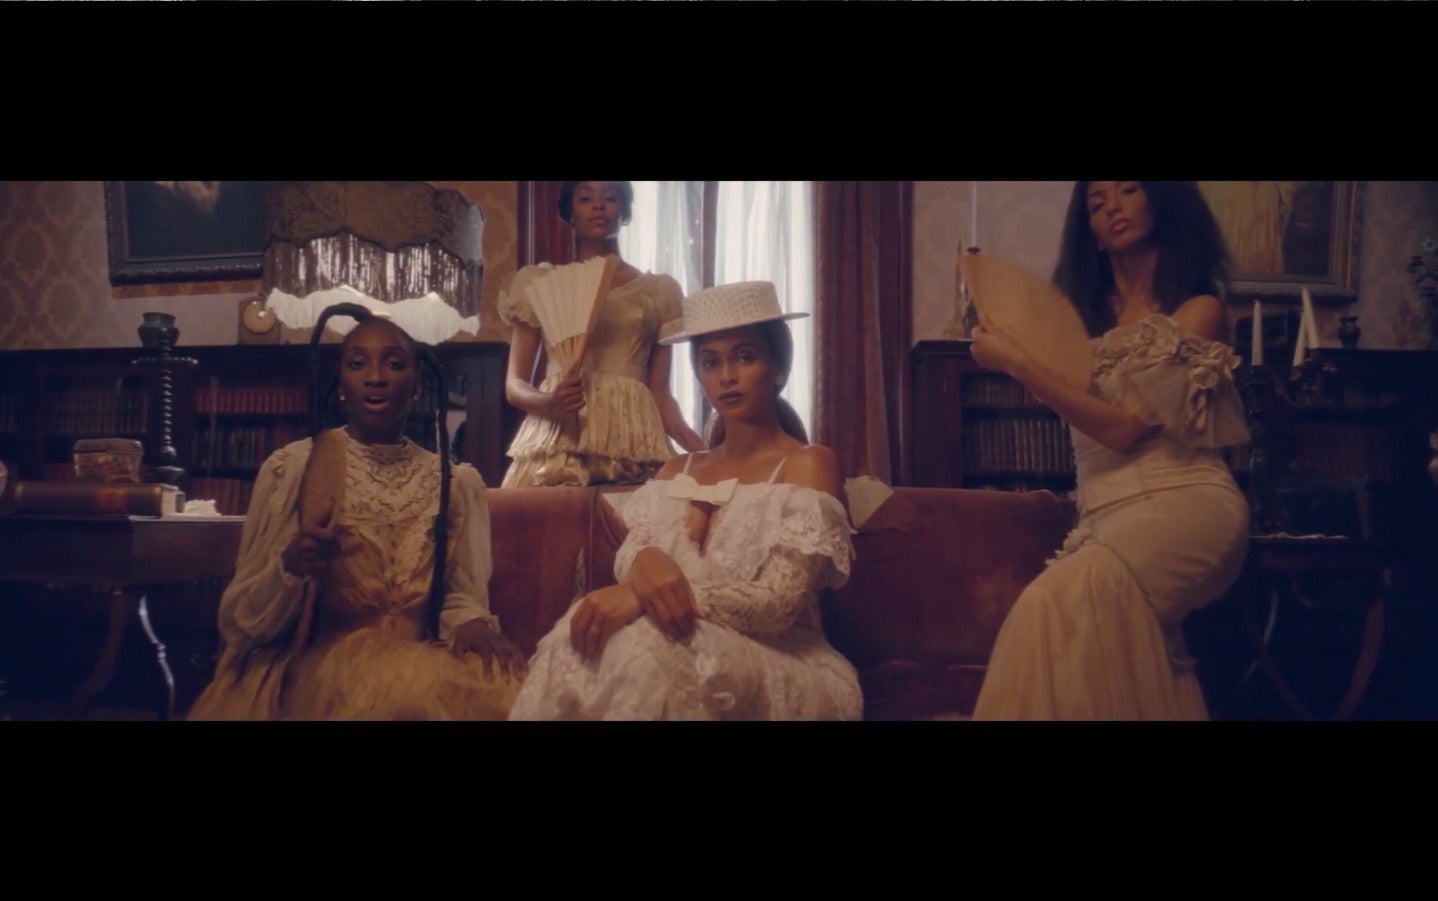 Can We Talk About the Epic Fashion Moments in Beyonce's 'Formation' Video?